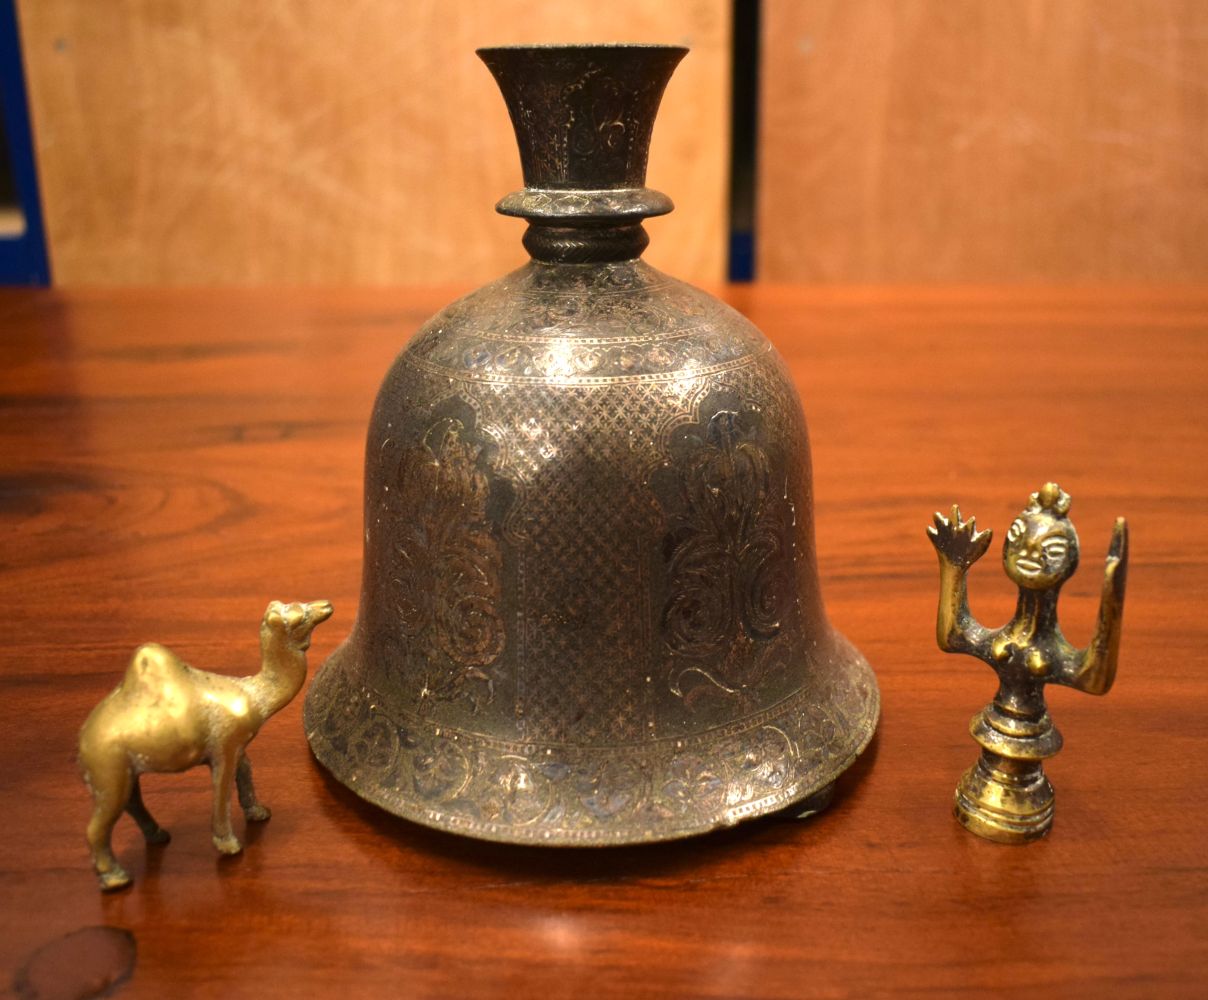 AN 18TH/19TH CENTURY MIDDLE EASTERN SILVER INLAID BRONZE HOOKAH PIPE BASE with two bronze figures. L